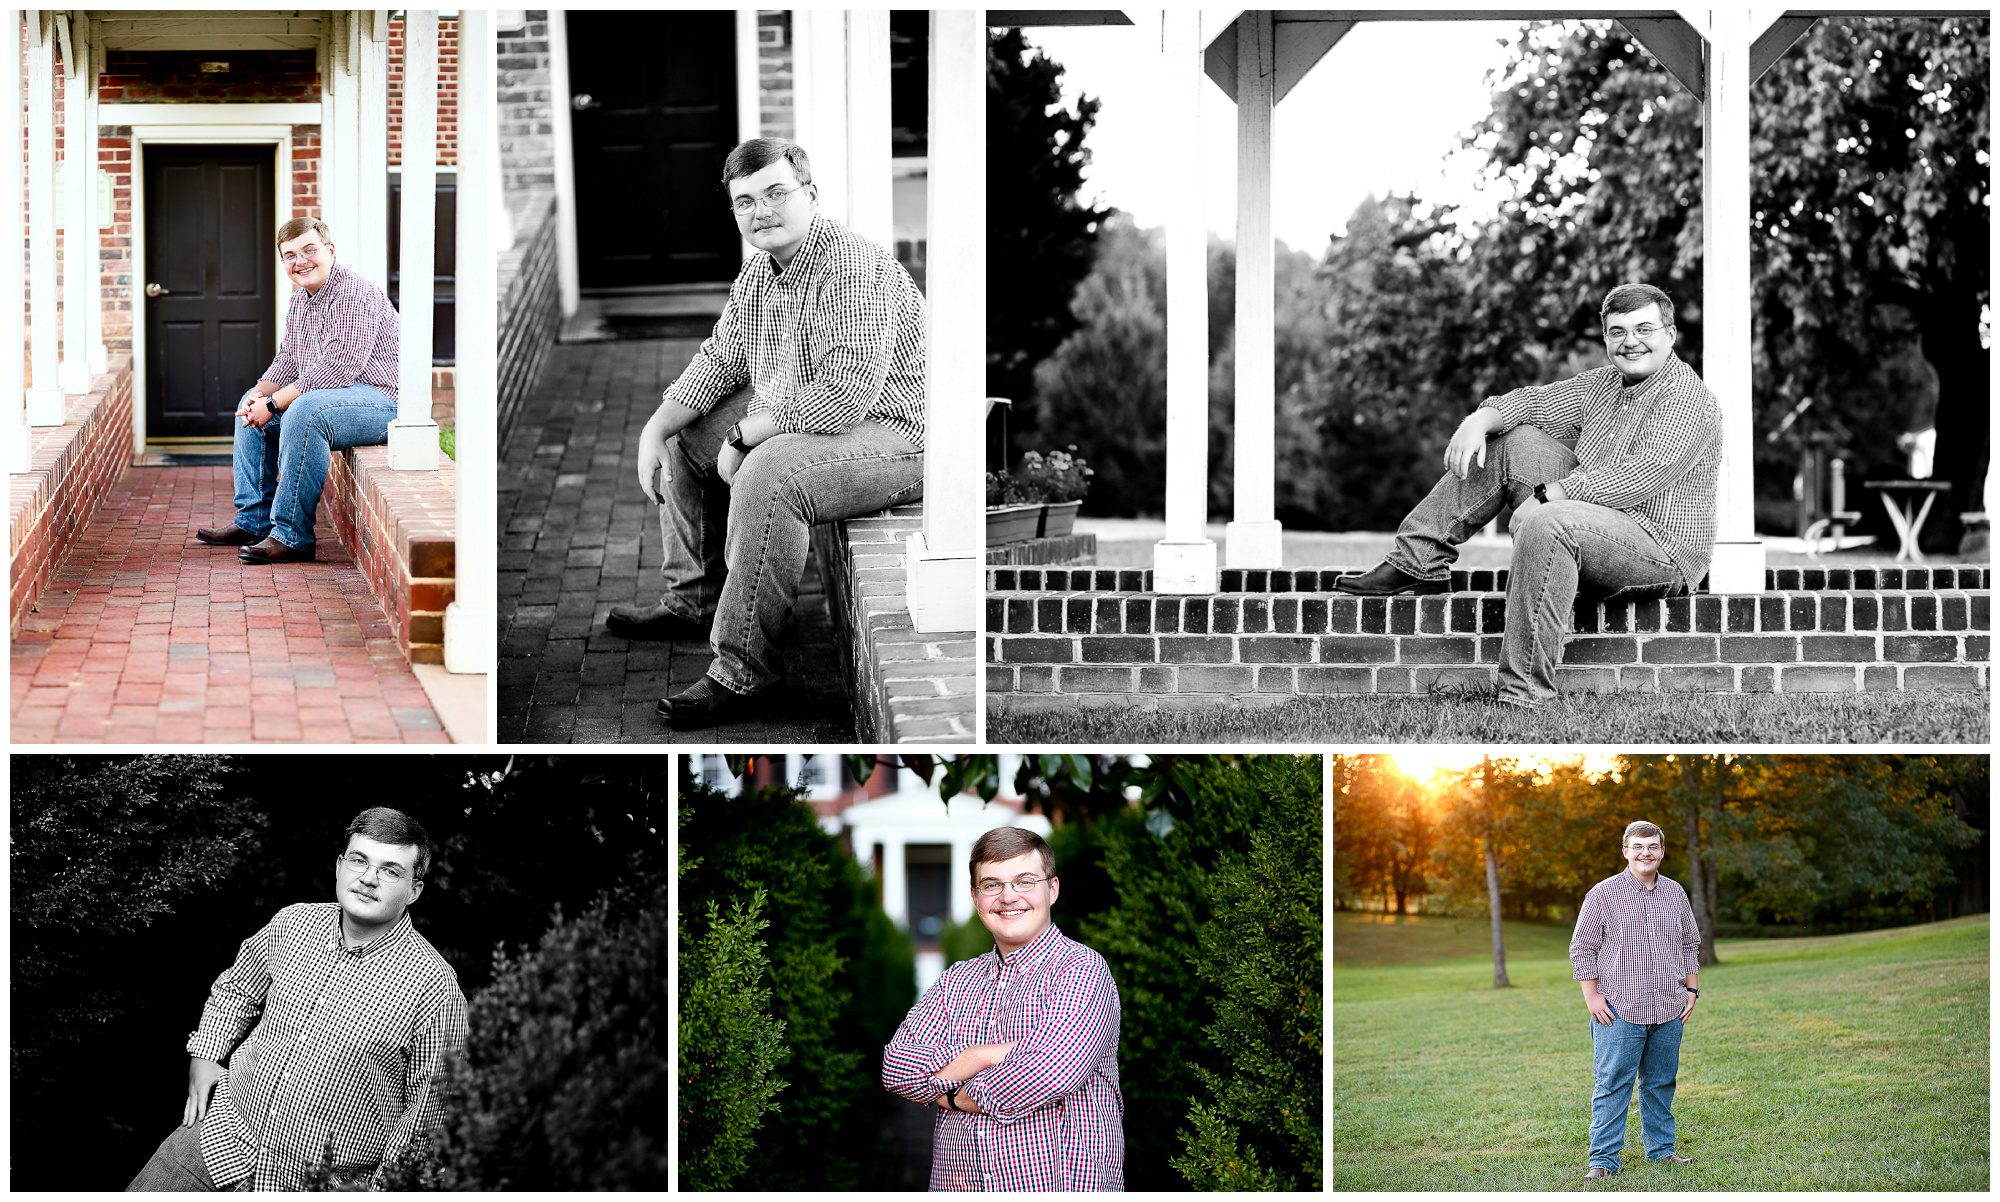 Monticello High School Senior Portraits Pickup Truck Fluvanna Charlottesville cville photographer pictures class of 2020 Ford F250 Teen Boy Country